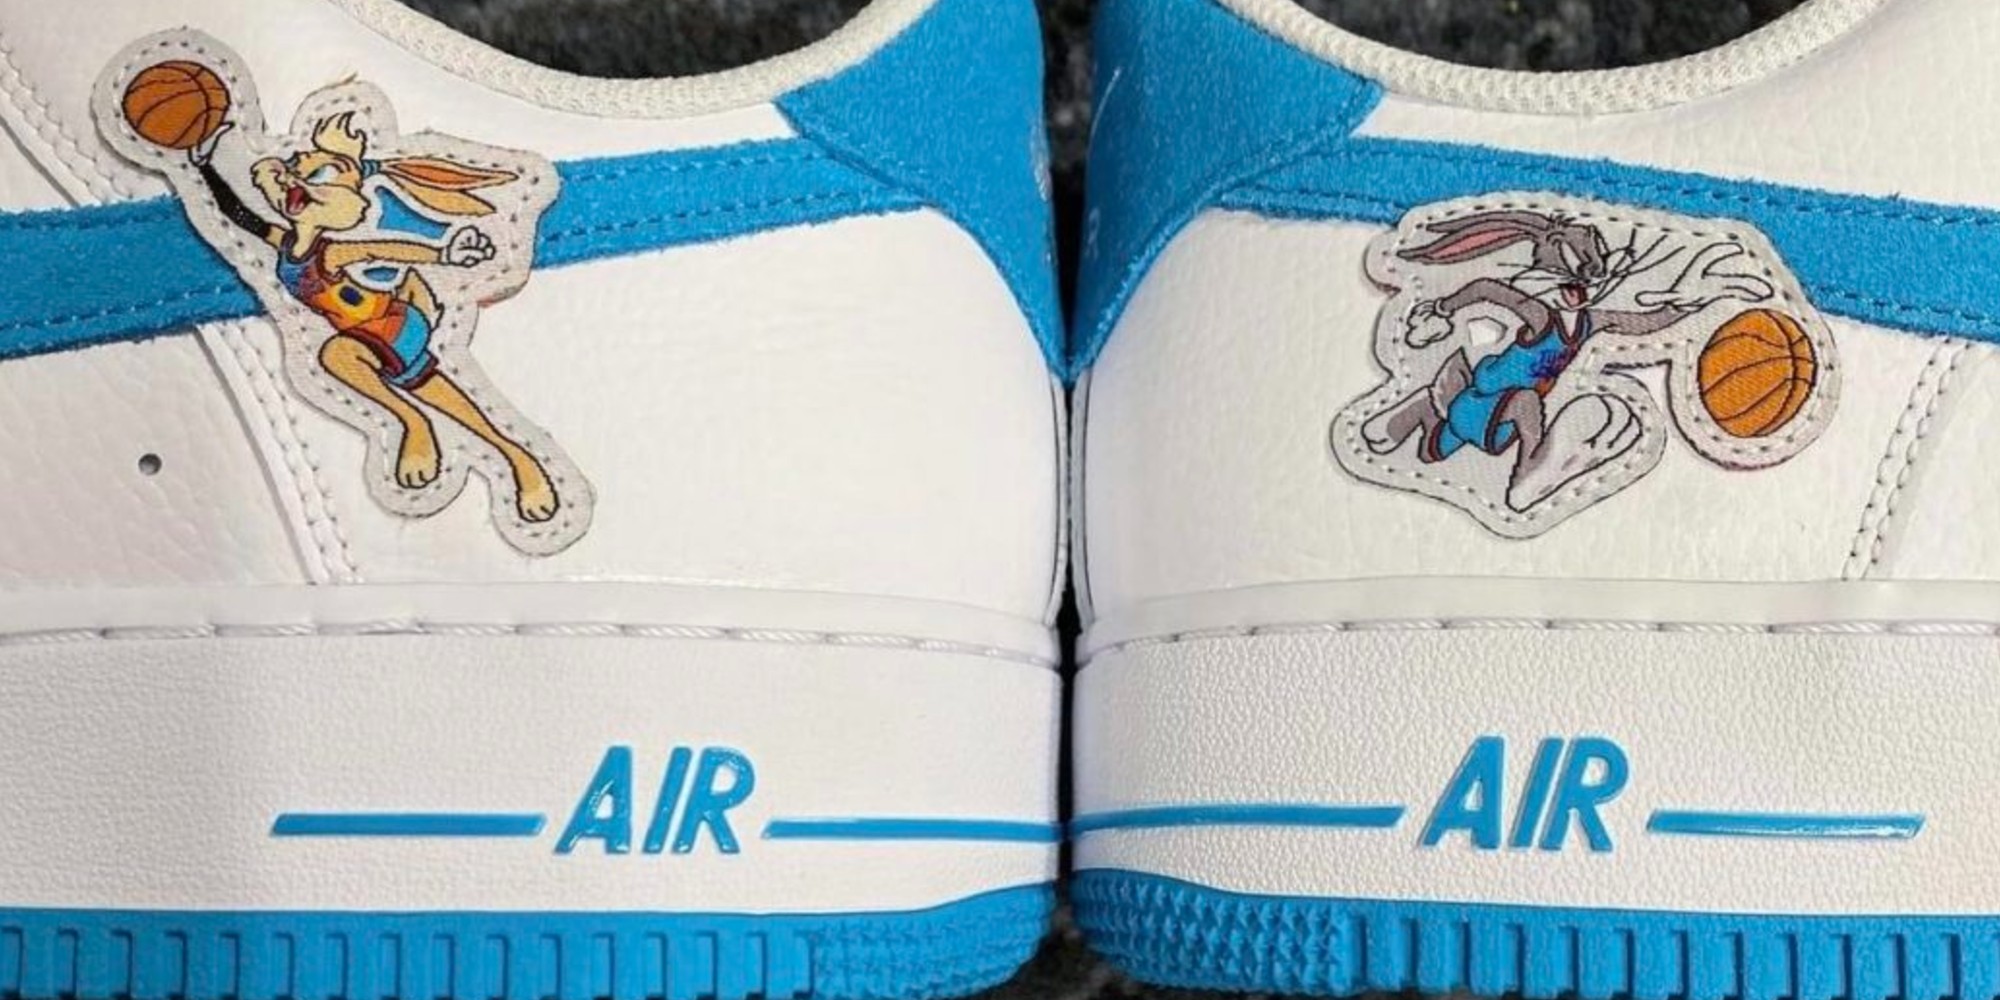 space jam hare force 1